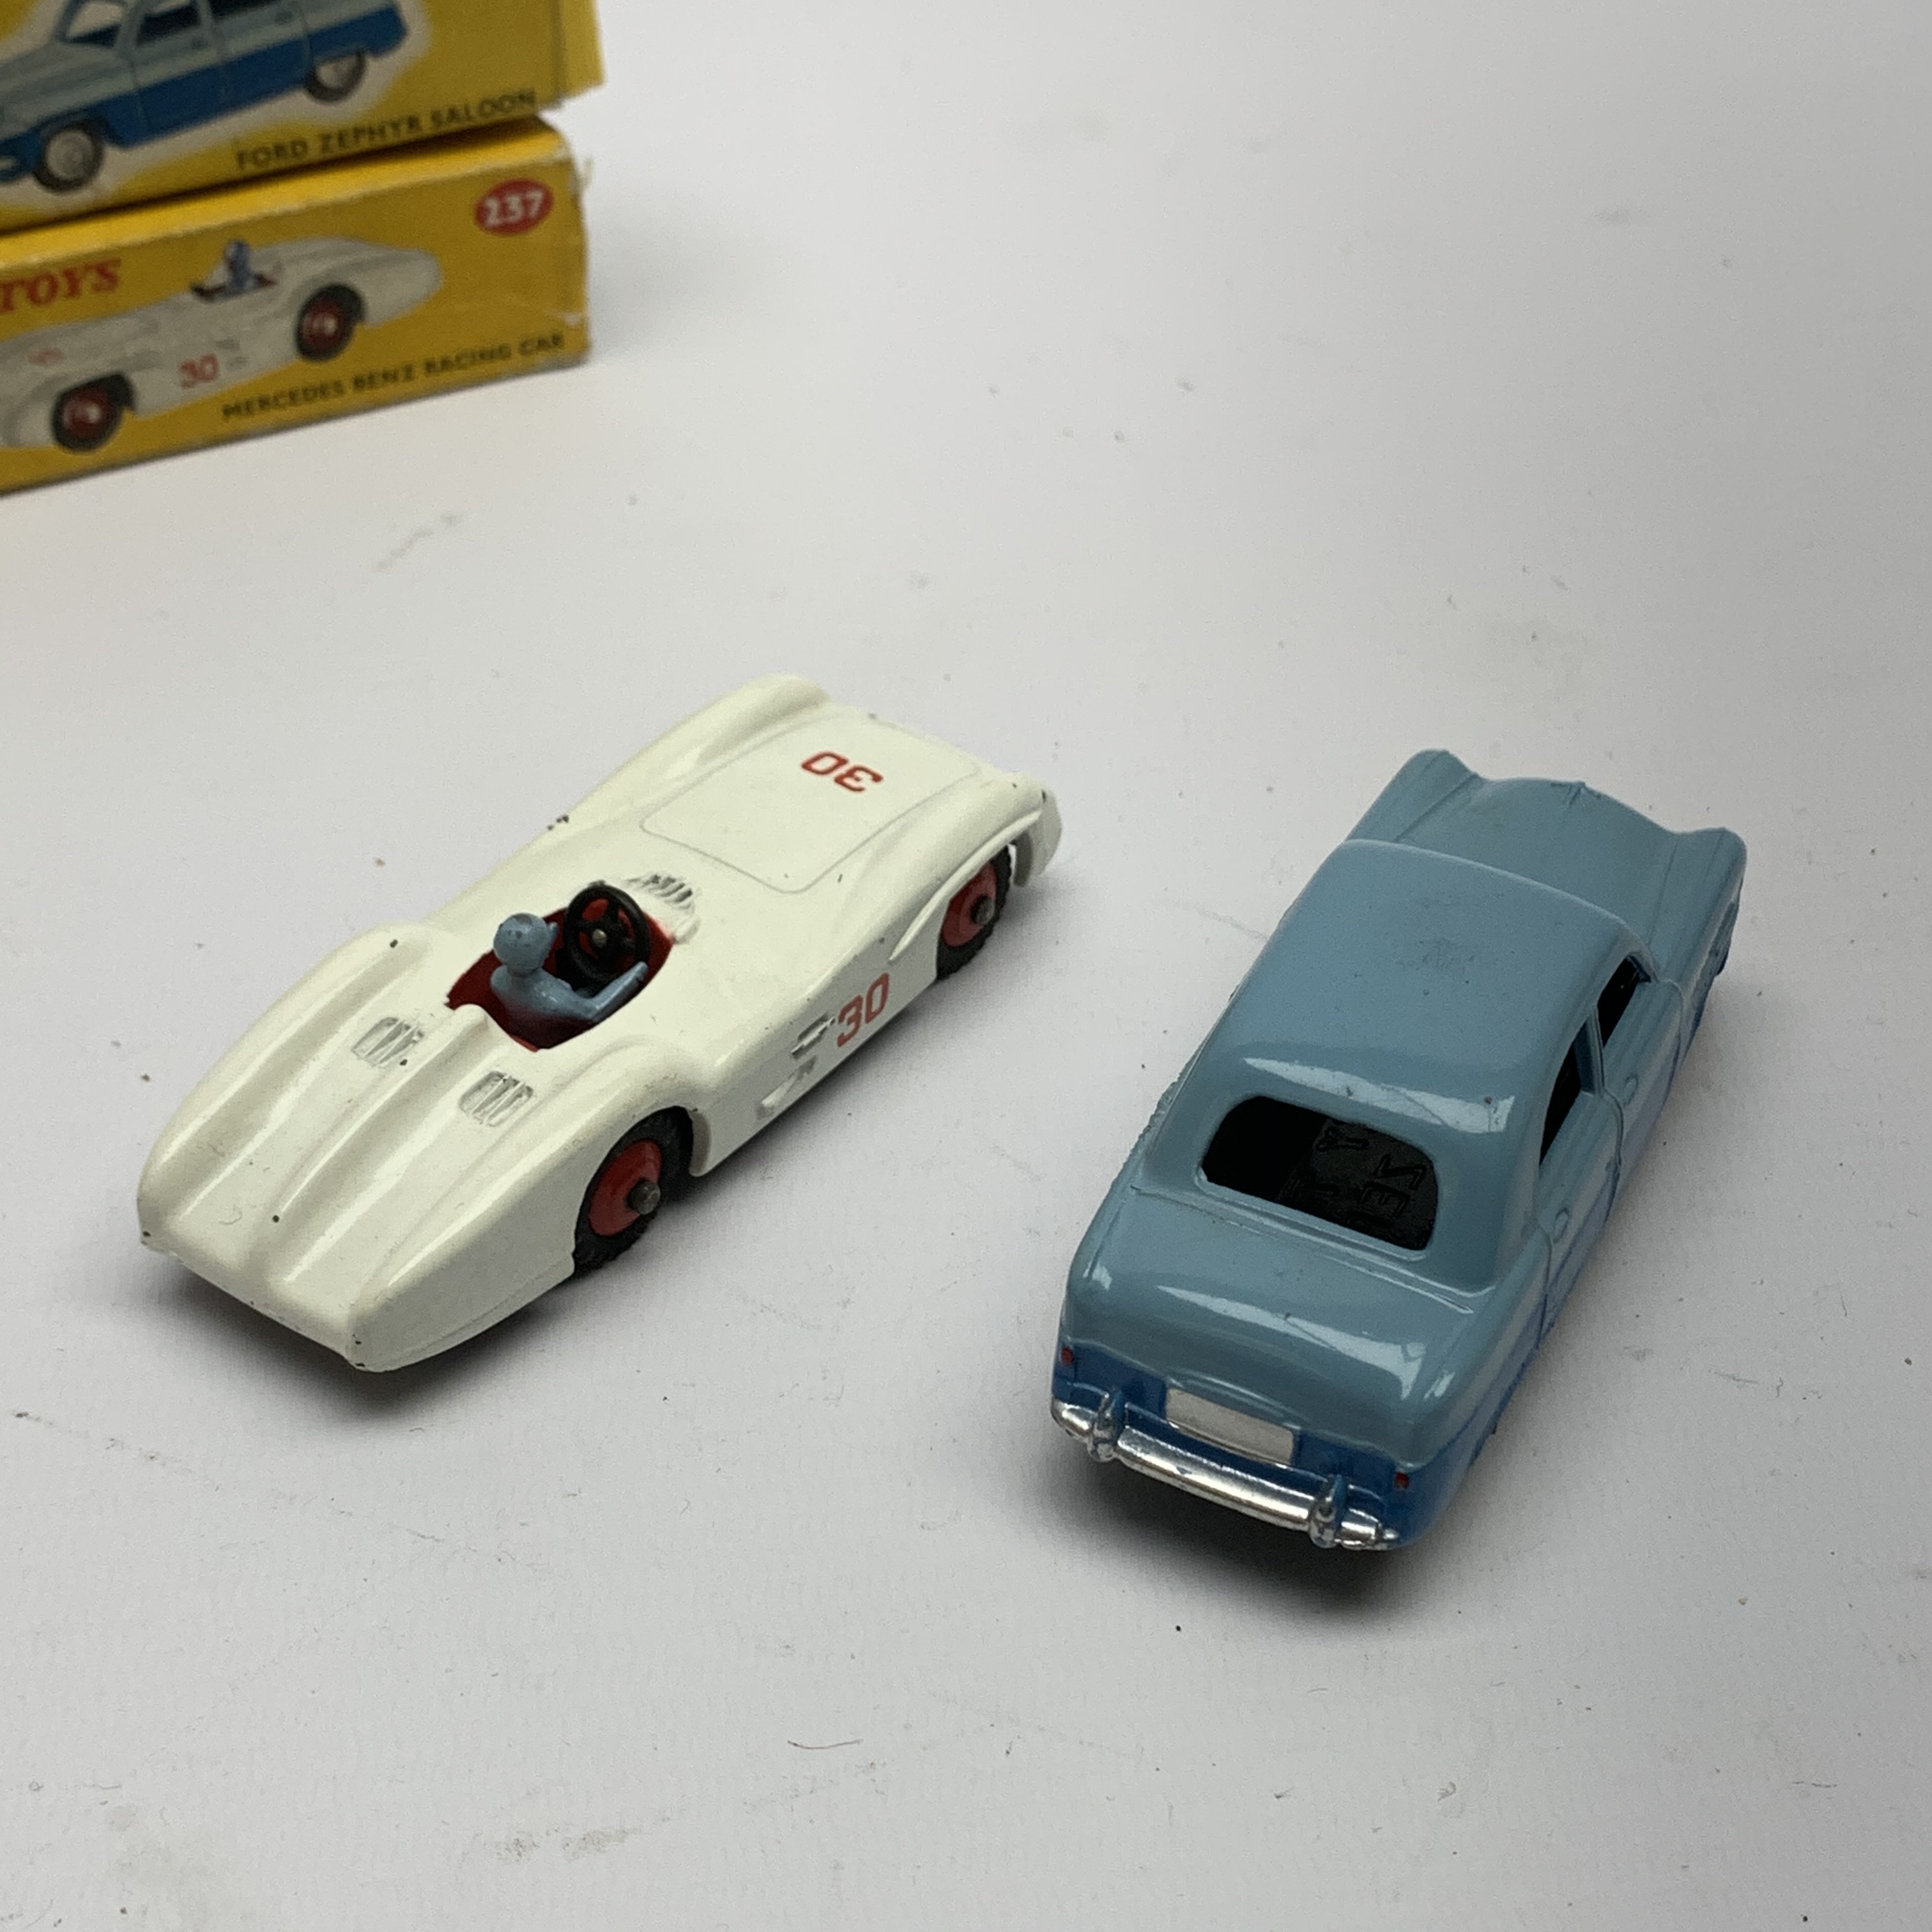 Dinky - Mercedes Benz Racing car No.237 and Ford Zephyr Saloon No.162, both boxed - Image 8 of 10